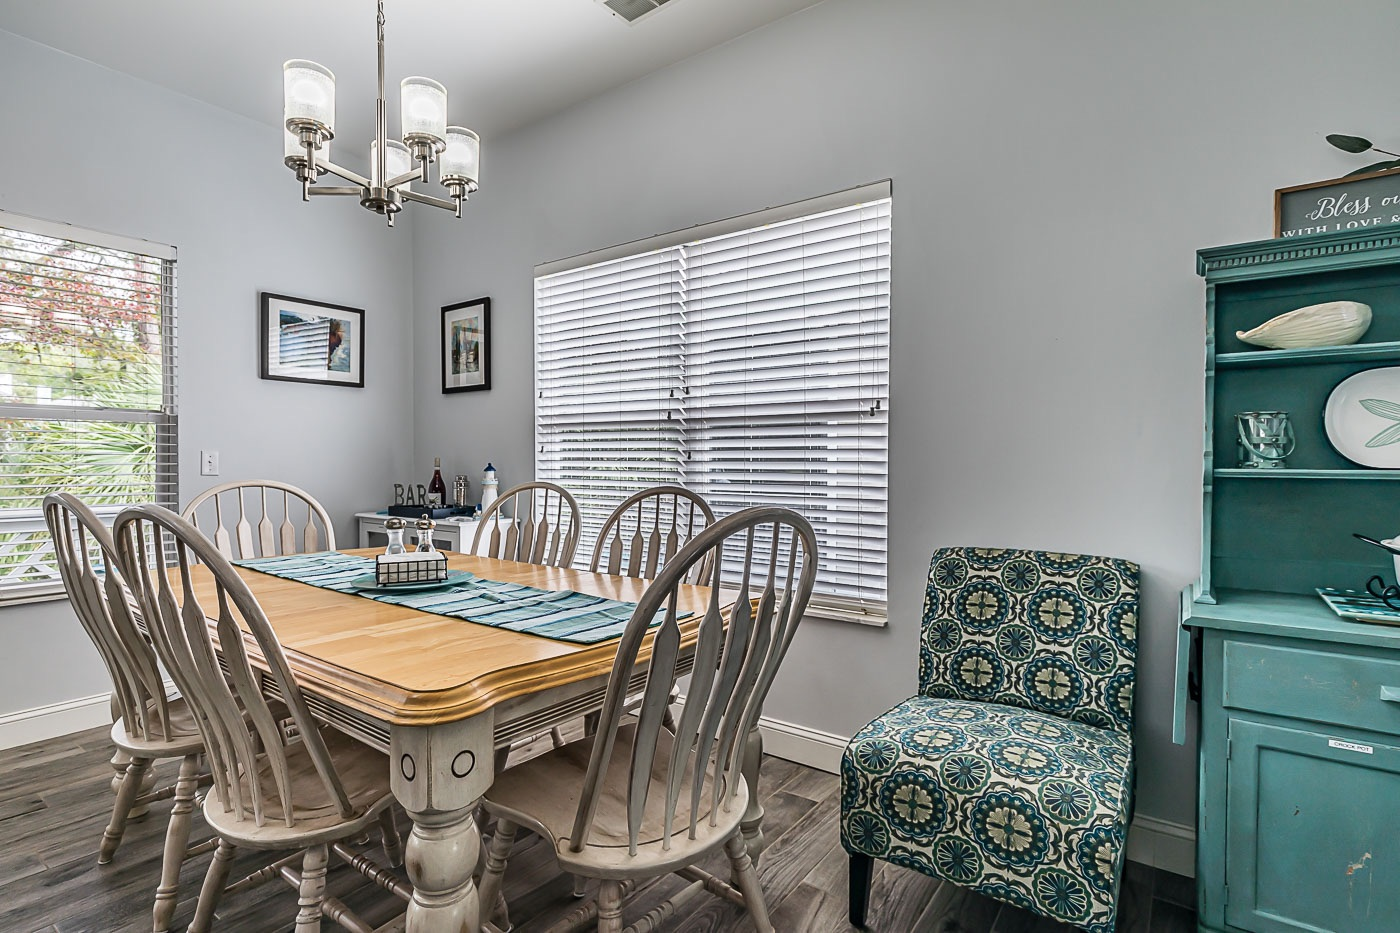 Dining area is perfect for dinner, card games, or puzzles!